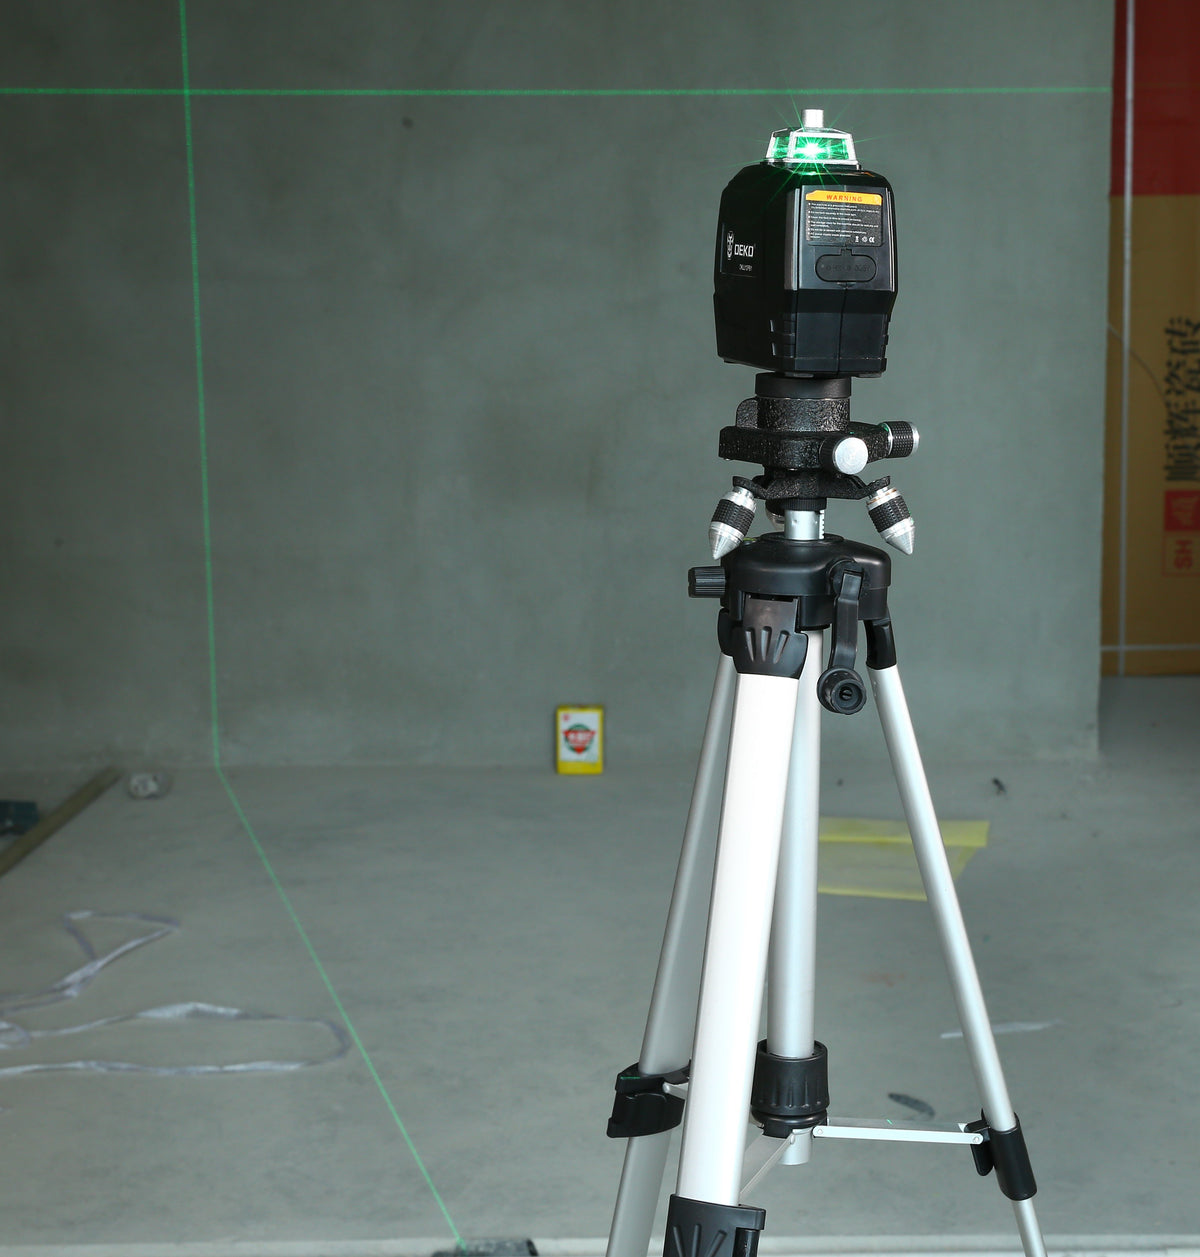 Measuring Tool Supplier DEKO's Laser Level with a Tripod